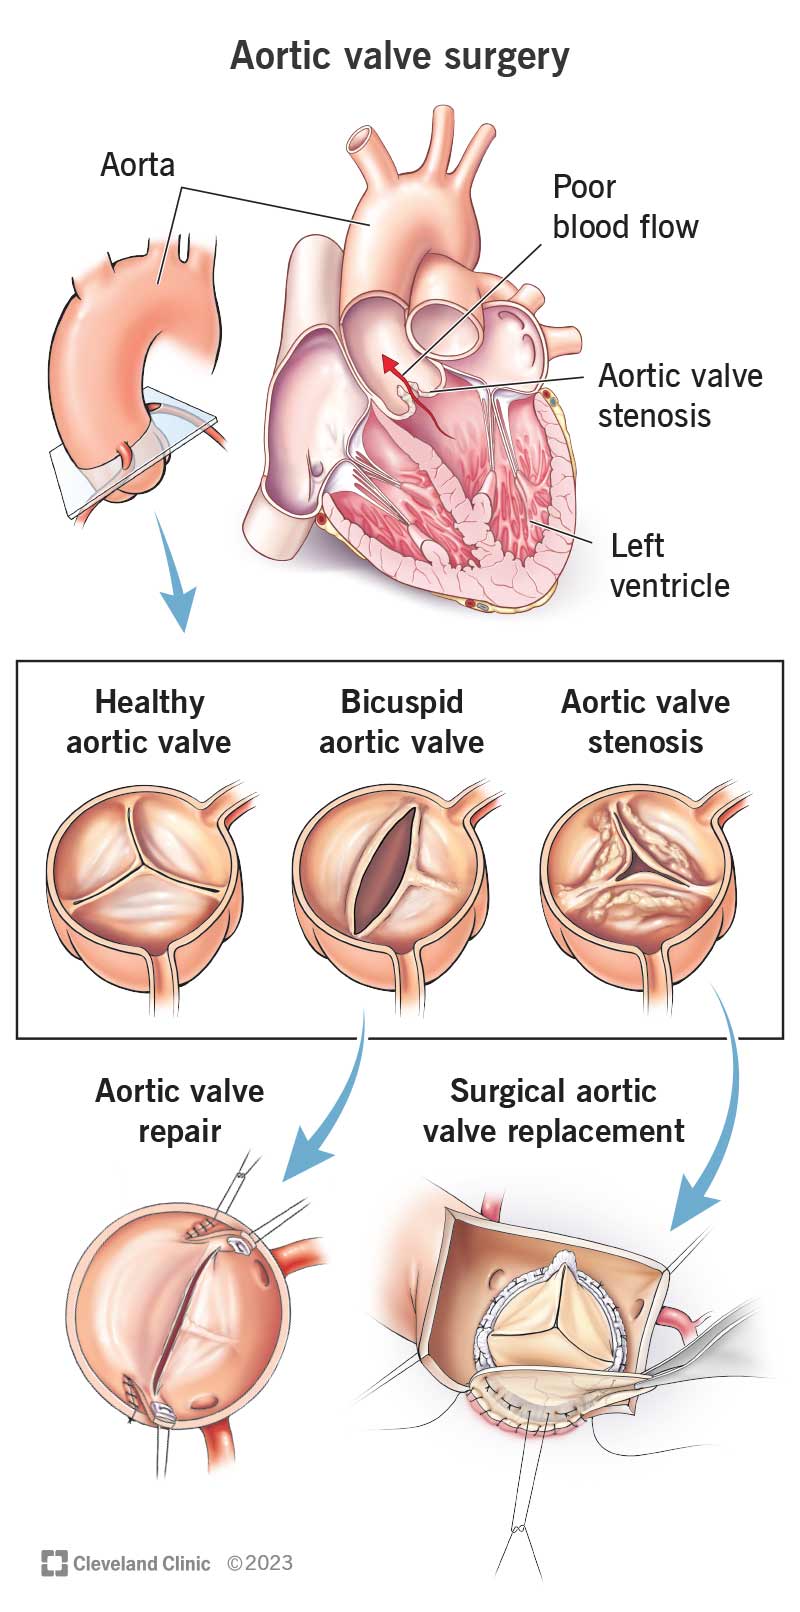 recovery after aortic valve surgery